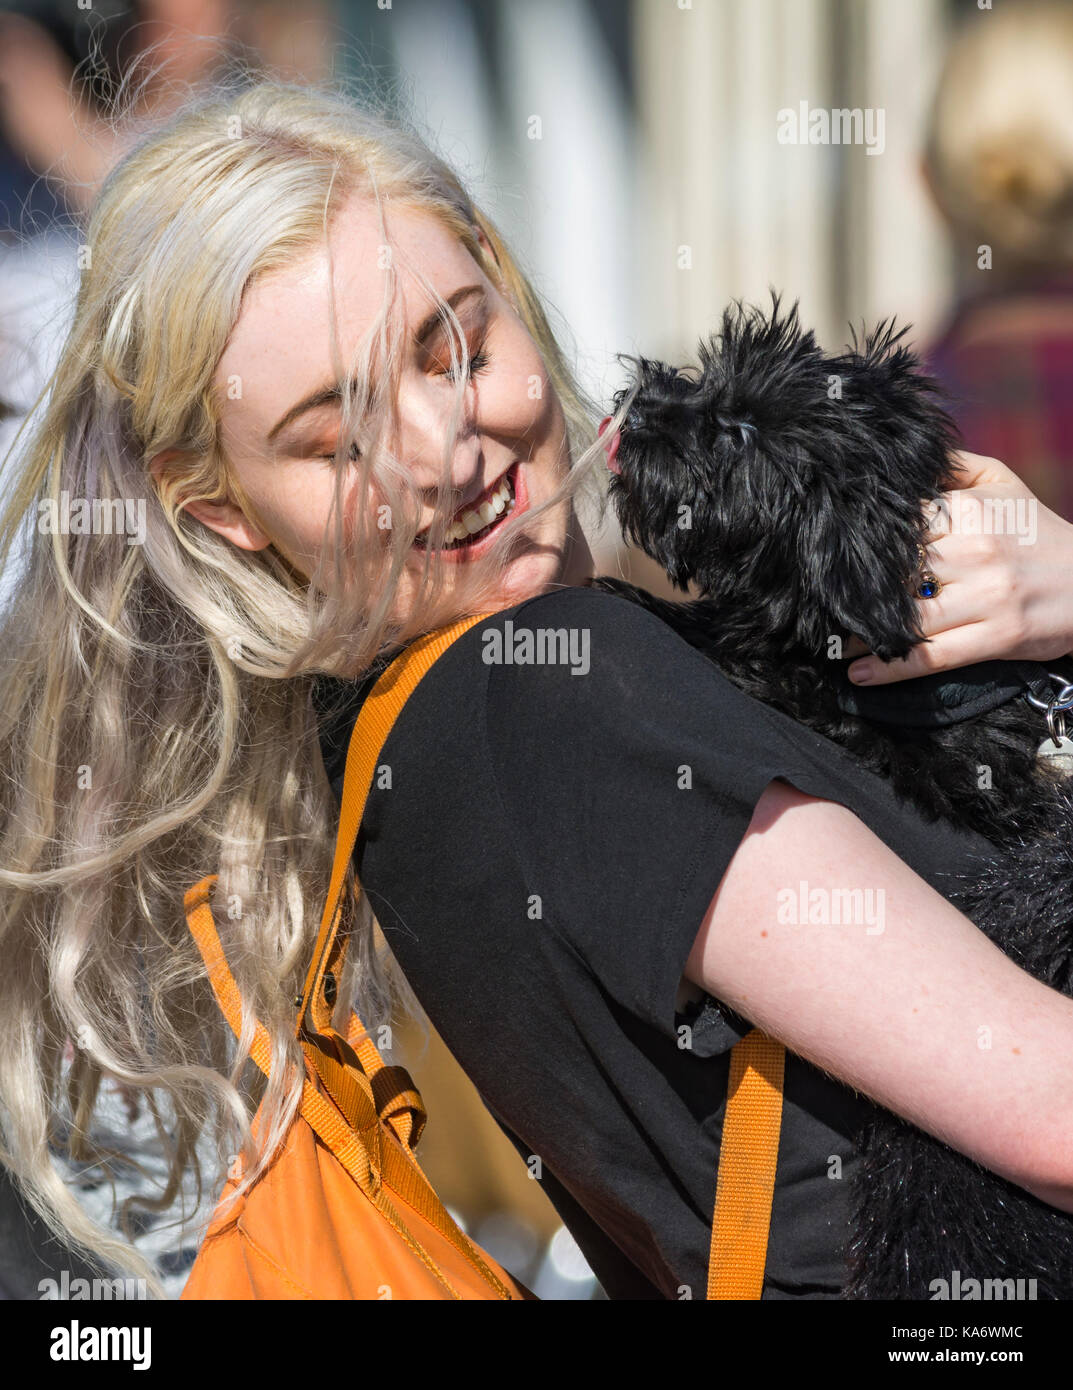 Young pretty woman greeting a dog that's licking her face. Stock Photo